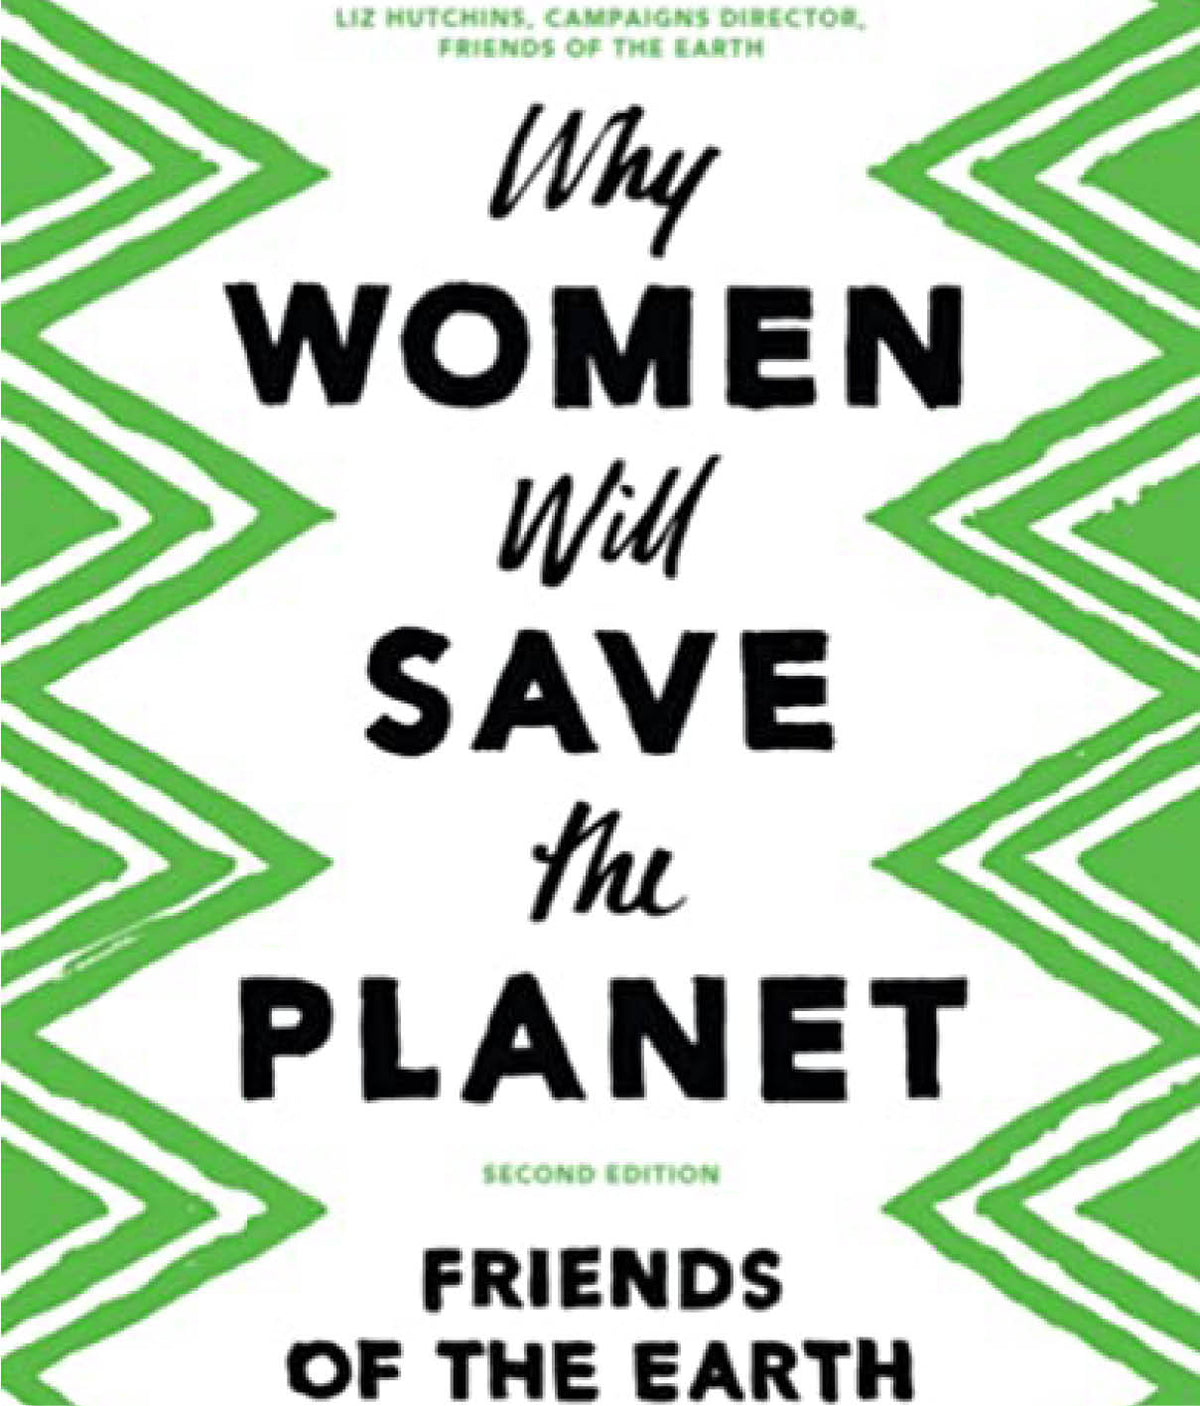 Why Women Will Save the Planet by Friends of the Earth and C40 Cities 